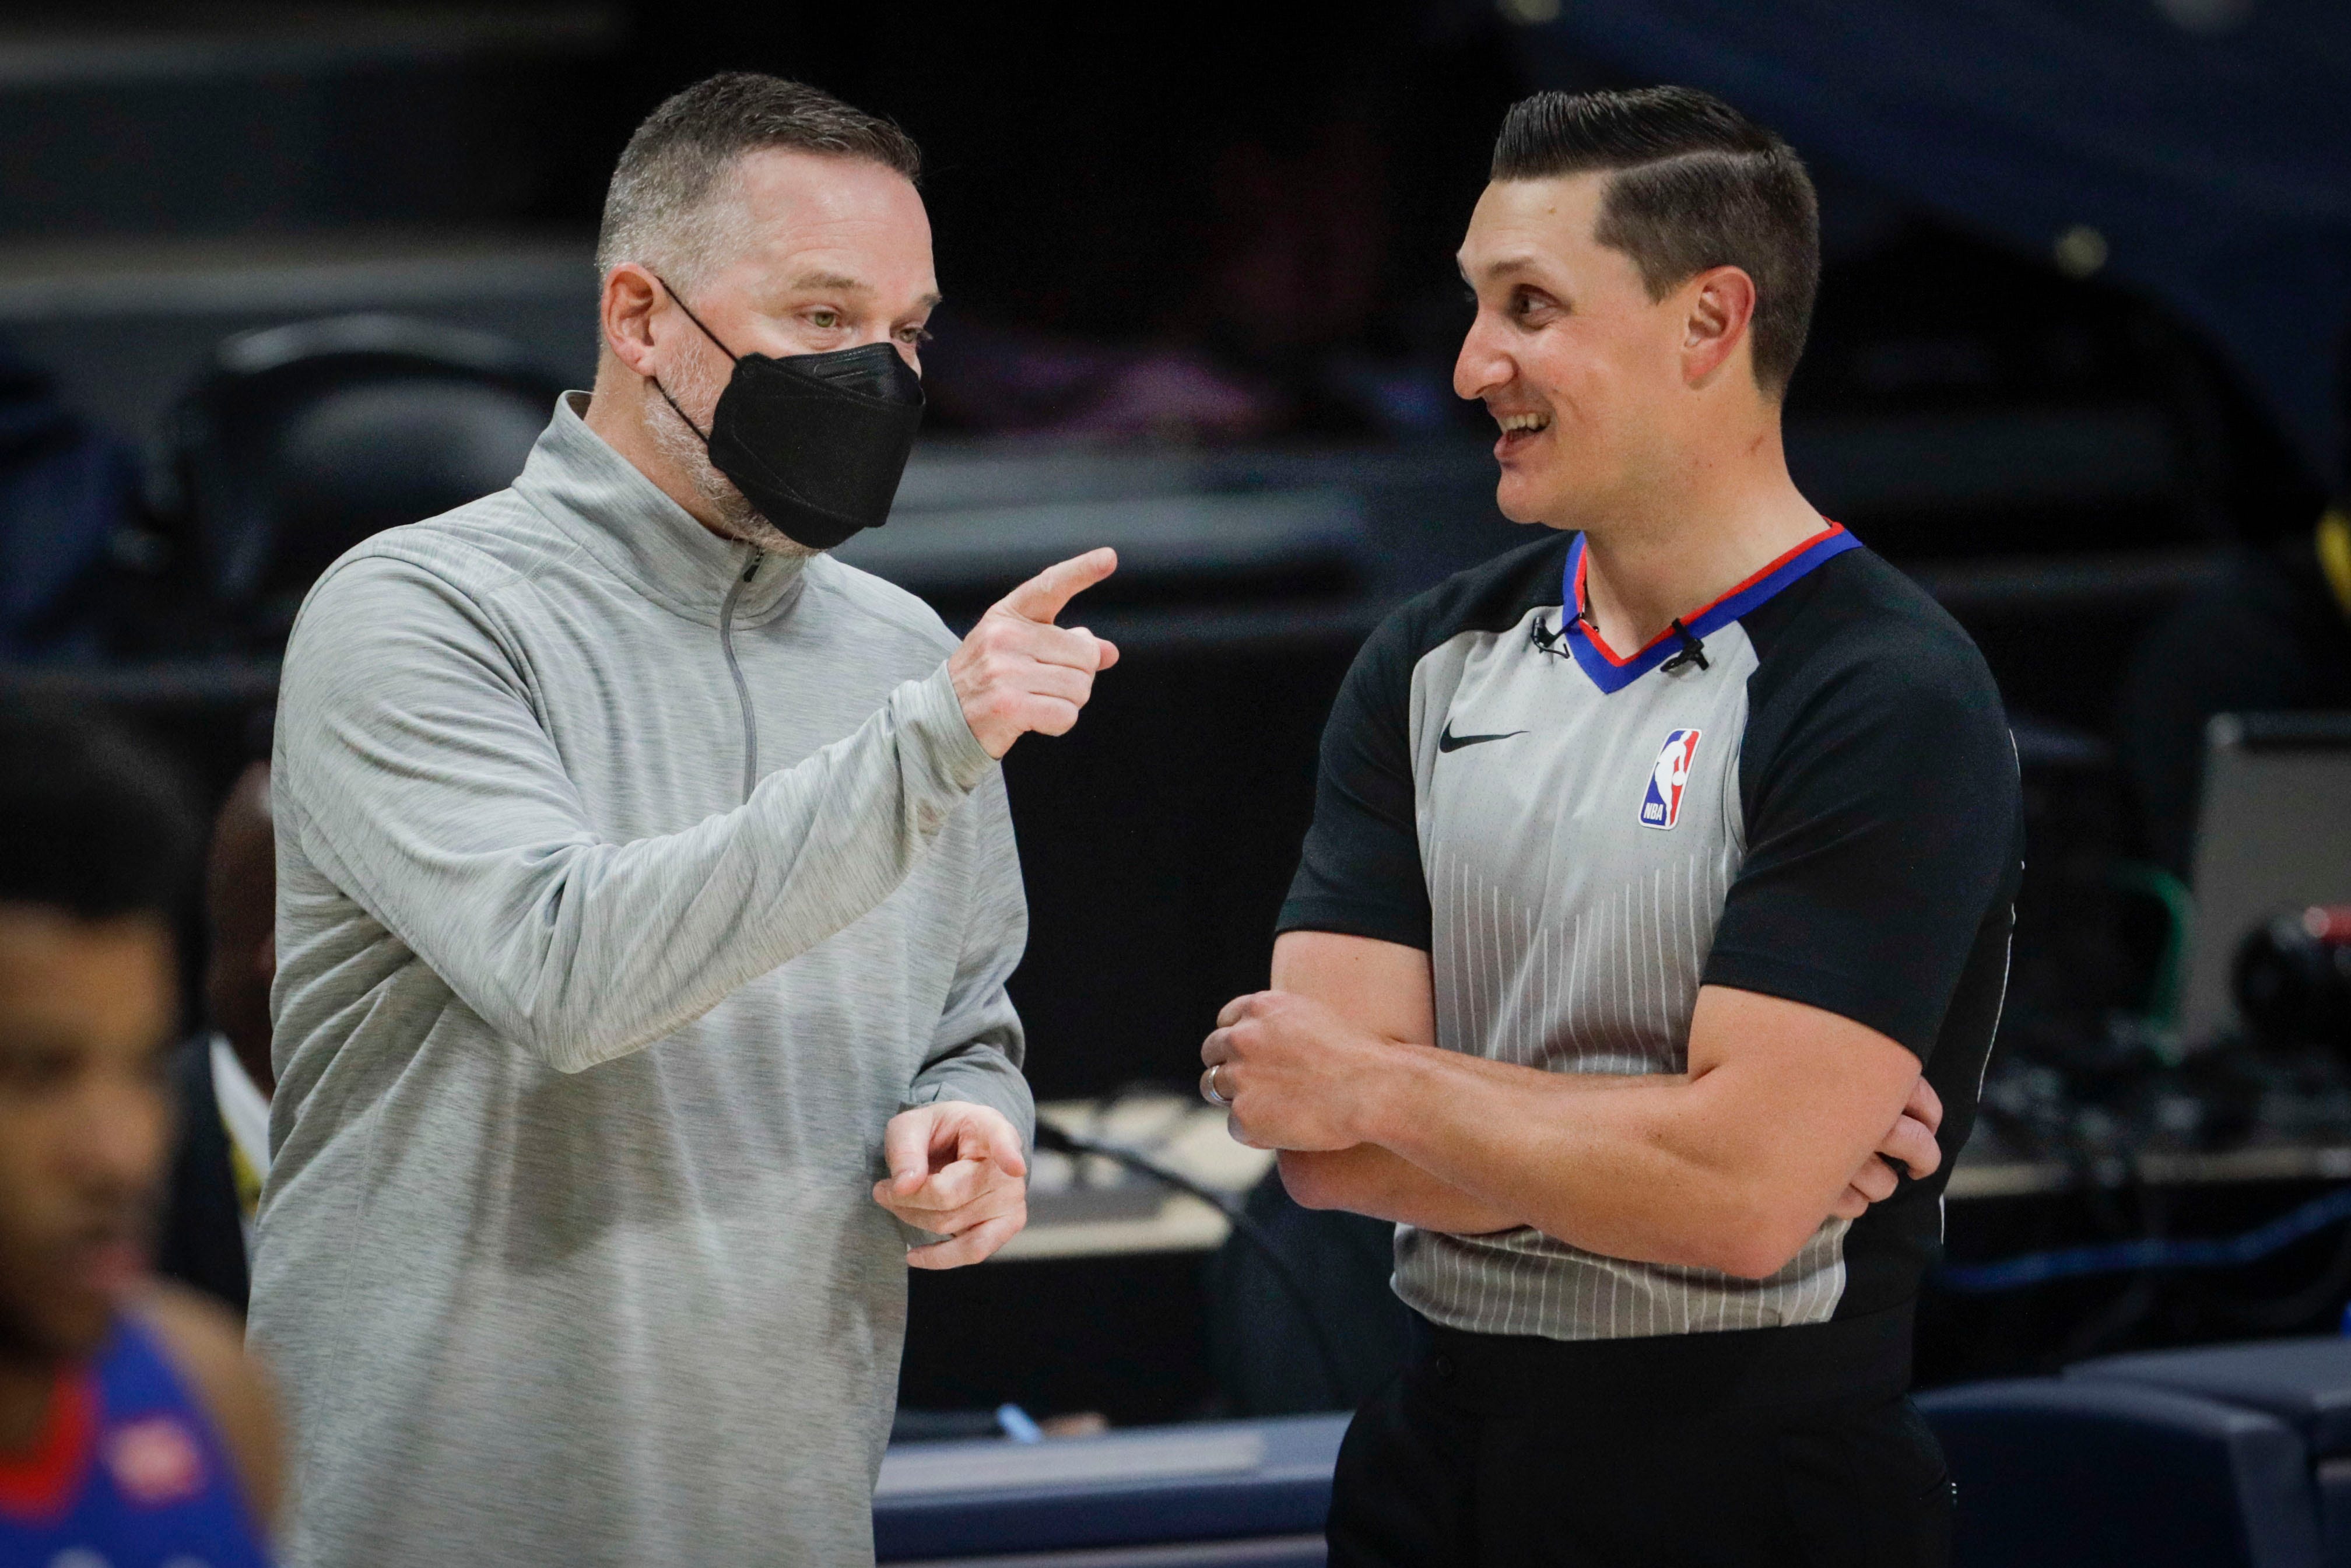 Denver Nuggets coach Michael Malone, left, talks to referee JB DeRosa (62) during a timeout in the third quarter of an NBA basketball game against the Detroit Pistons in Denver, Tuesday, April 6, 2021.